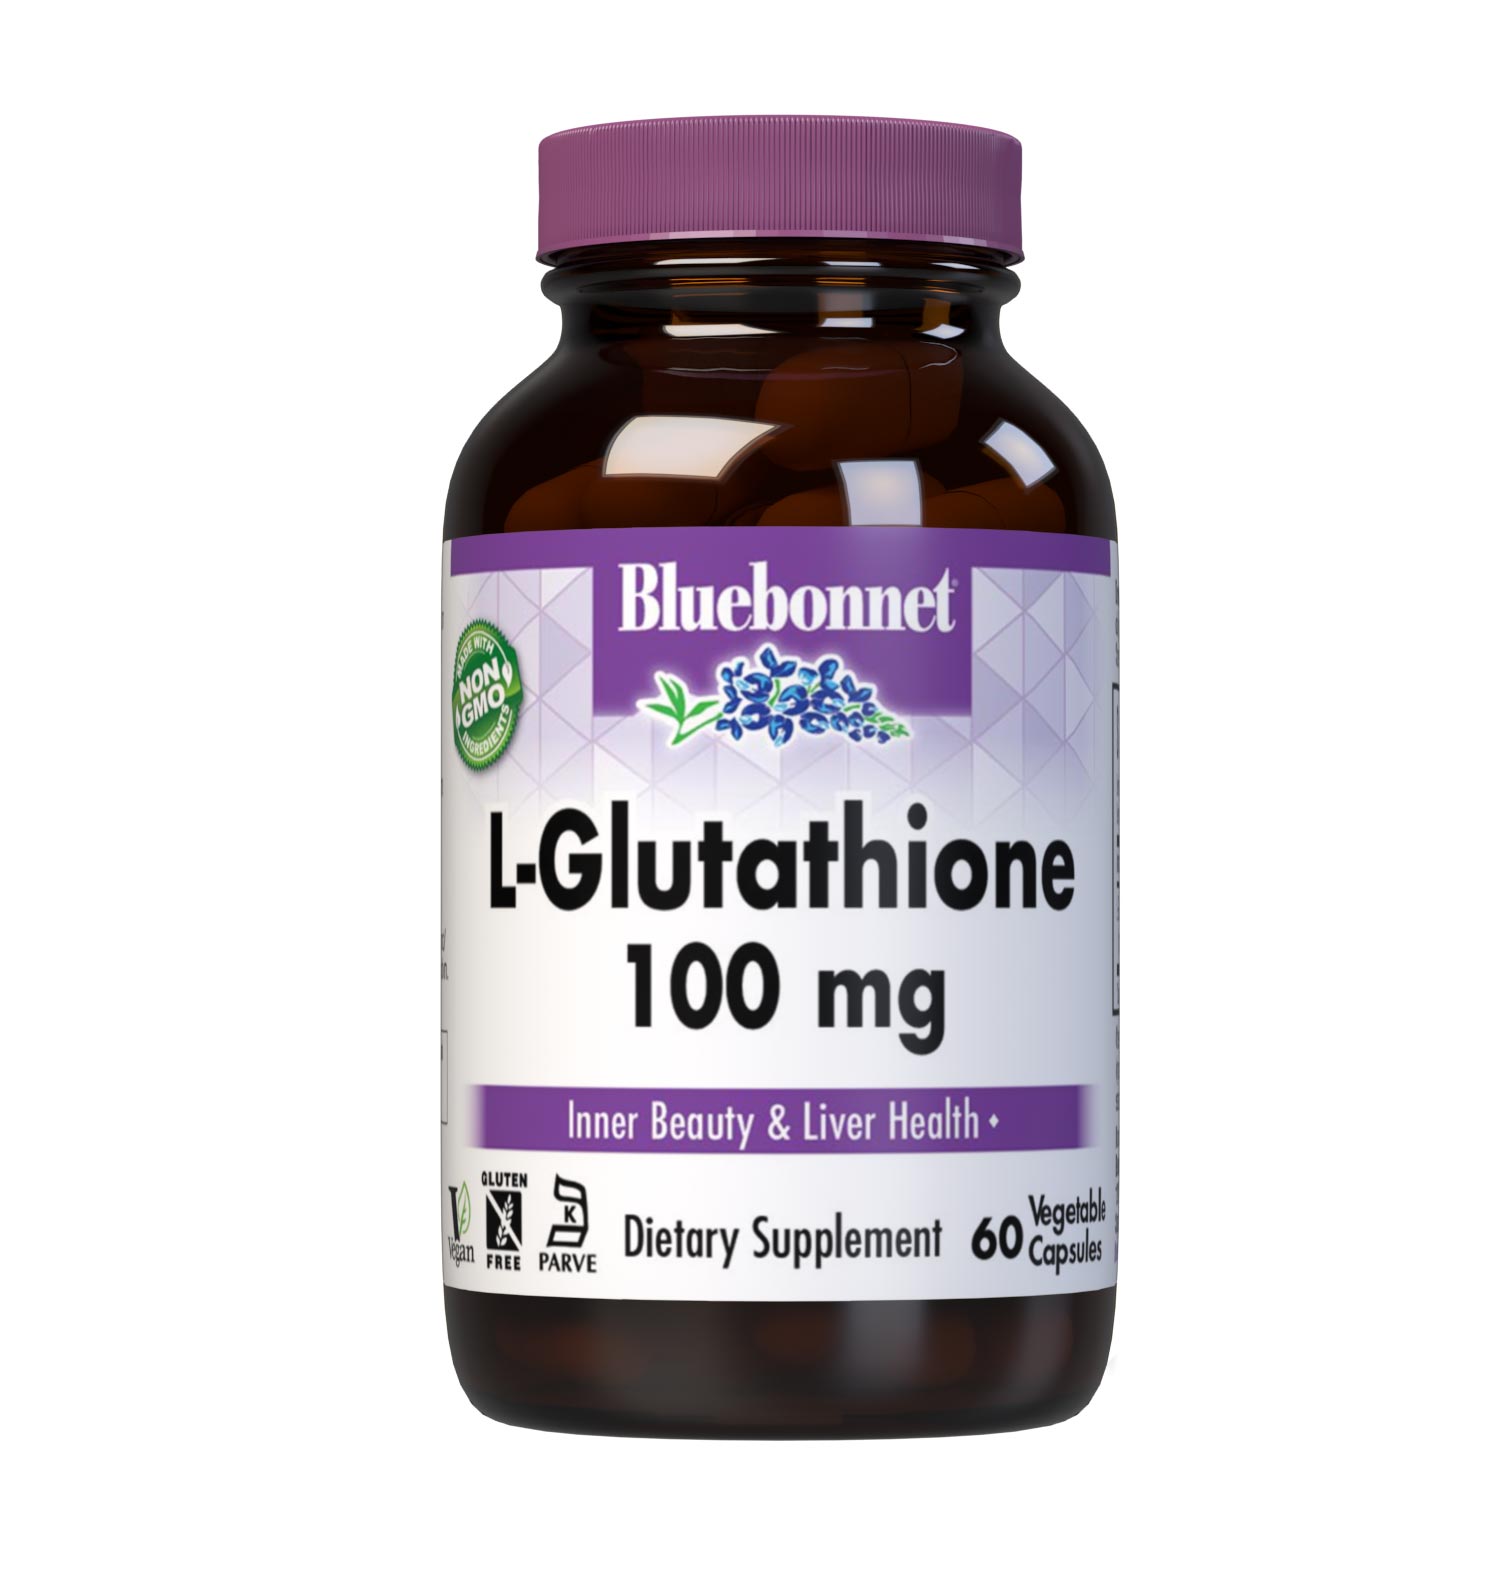 Bluebonnet’s L-Glutathione 100 mg 60 Vegetable Capsules are formulated with the free-form amino acid L-glutathione in its crystalline form. L-Glutathione protects against free-radical formation and supports inner beauty and liver health. #size_60 count